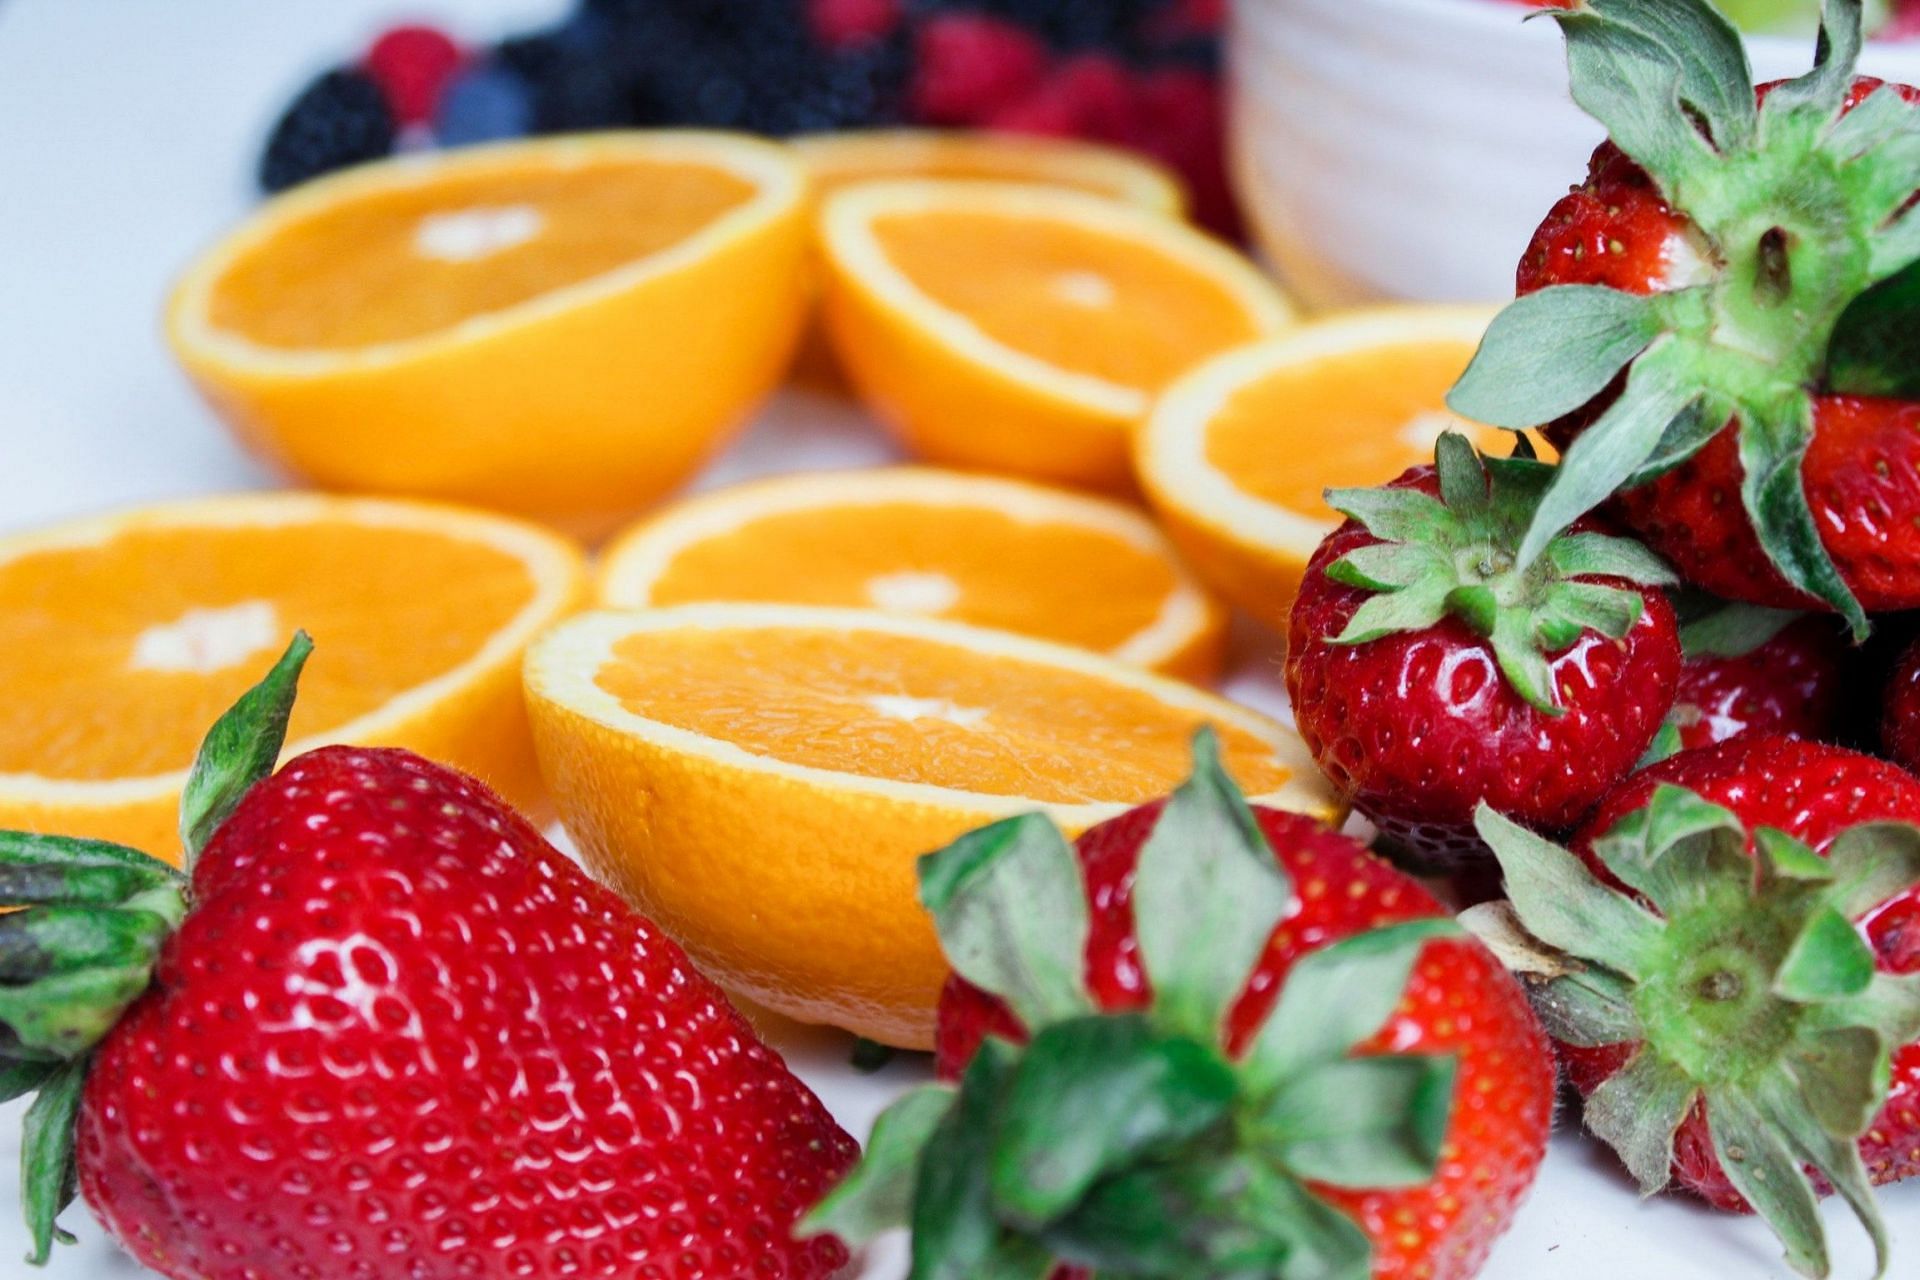 Eating fruits as an evening snack (image sourced via Pexels / Photo by Jane Doan)